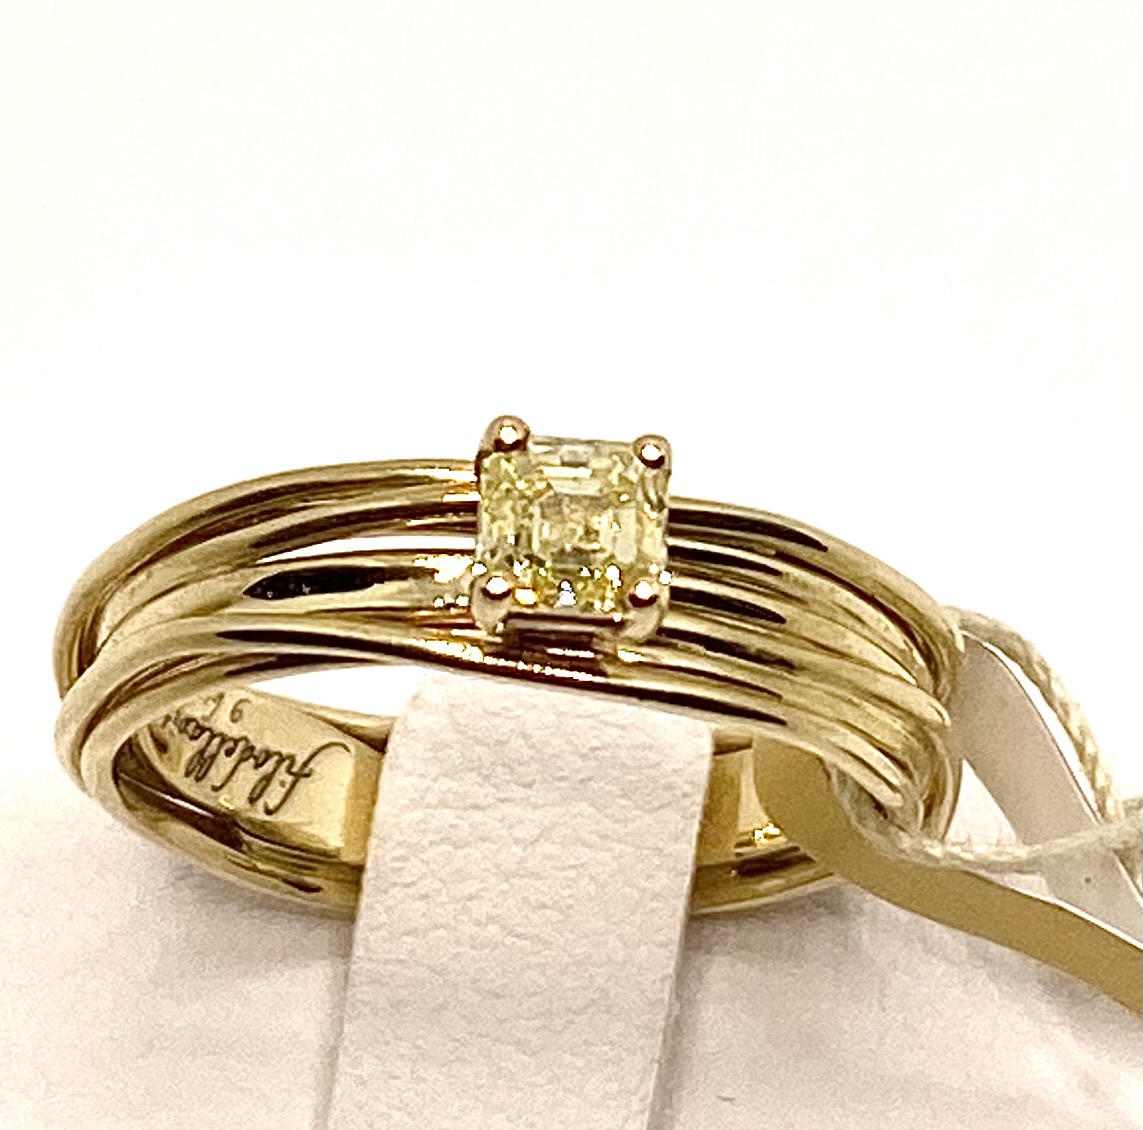 Solitaire 7-wire screwdriver in 9kt Yellow Gold with 0.27ct S1 Natural Fancy Yellow Diamond